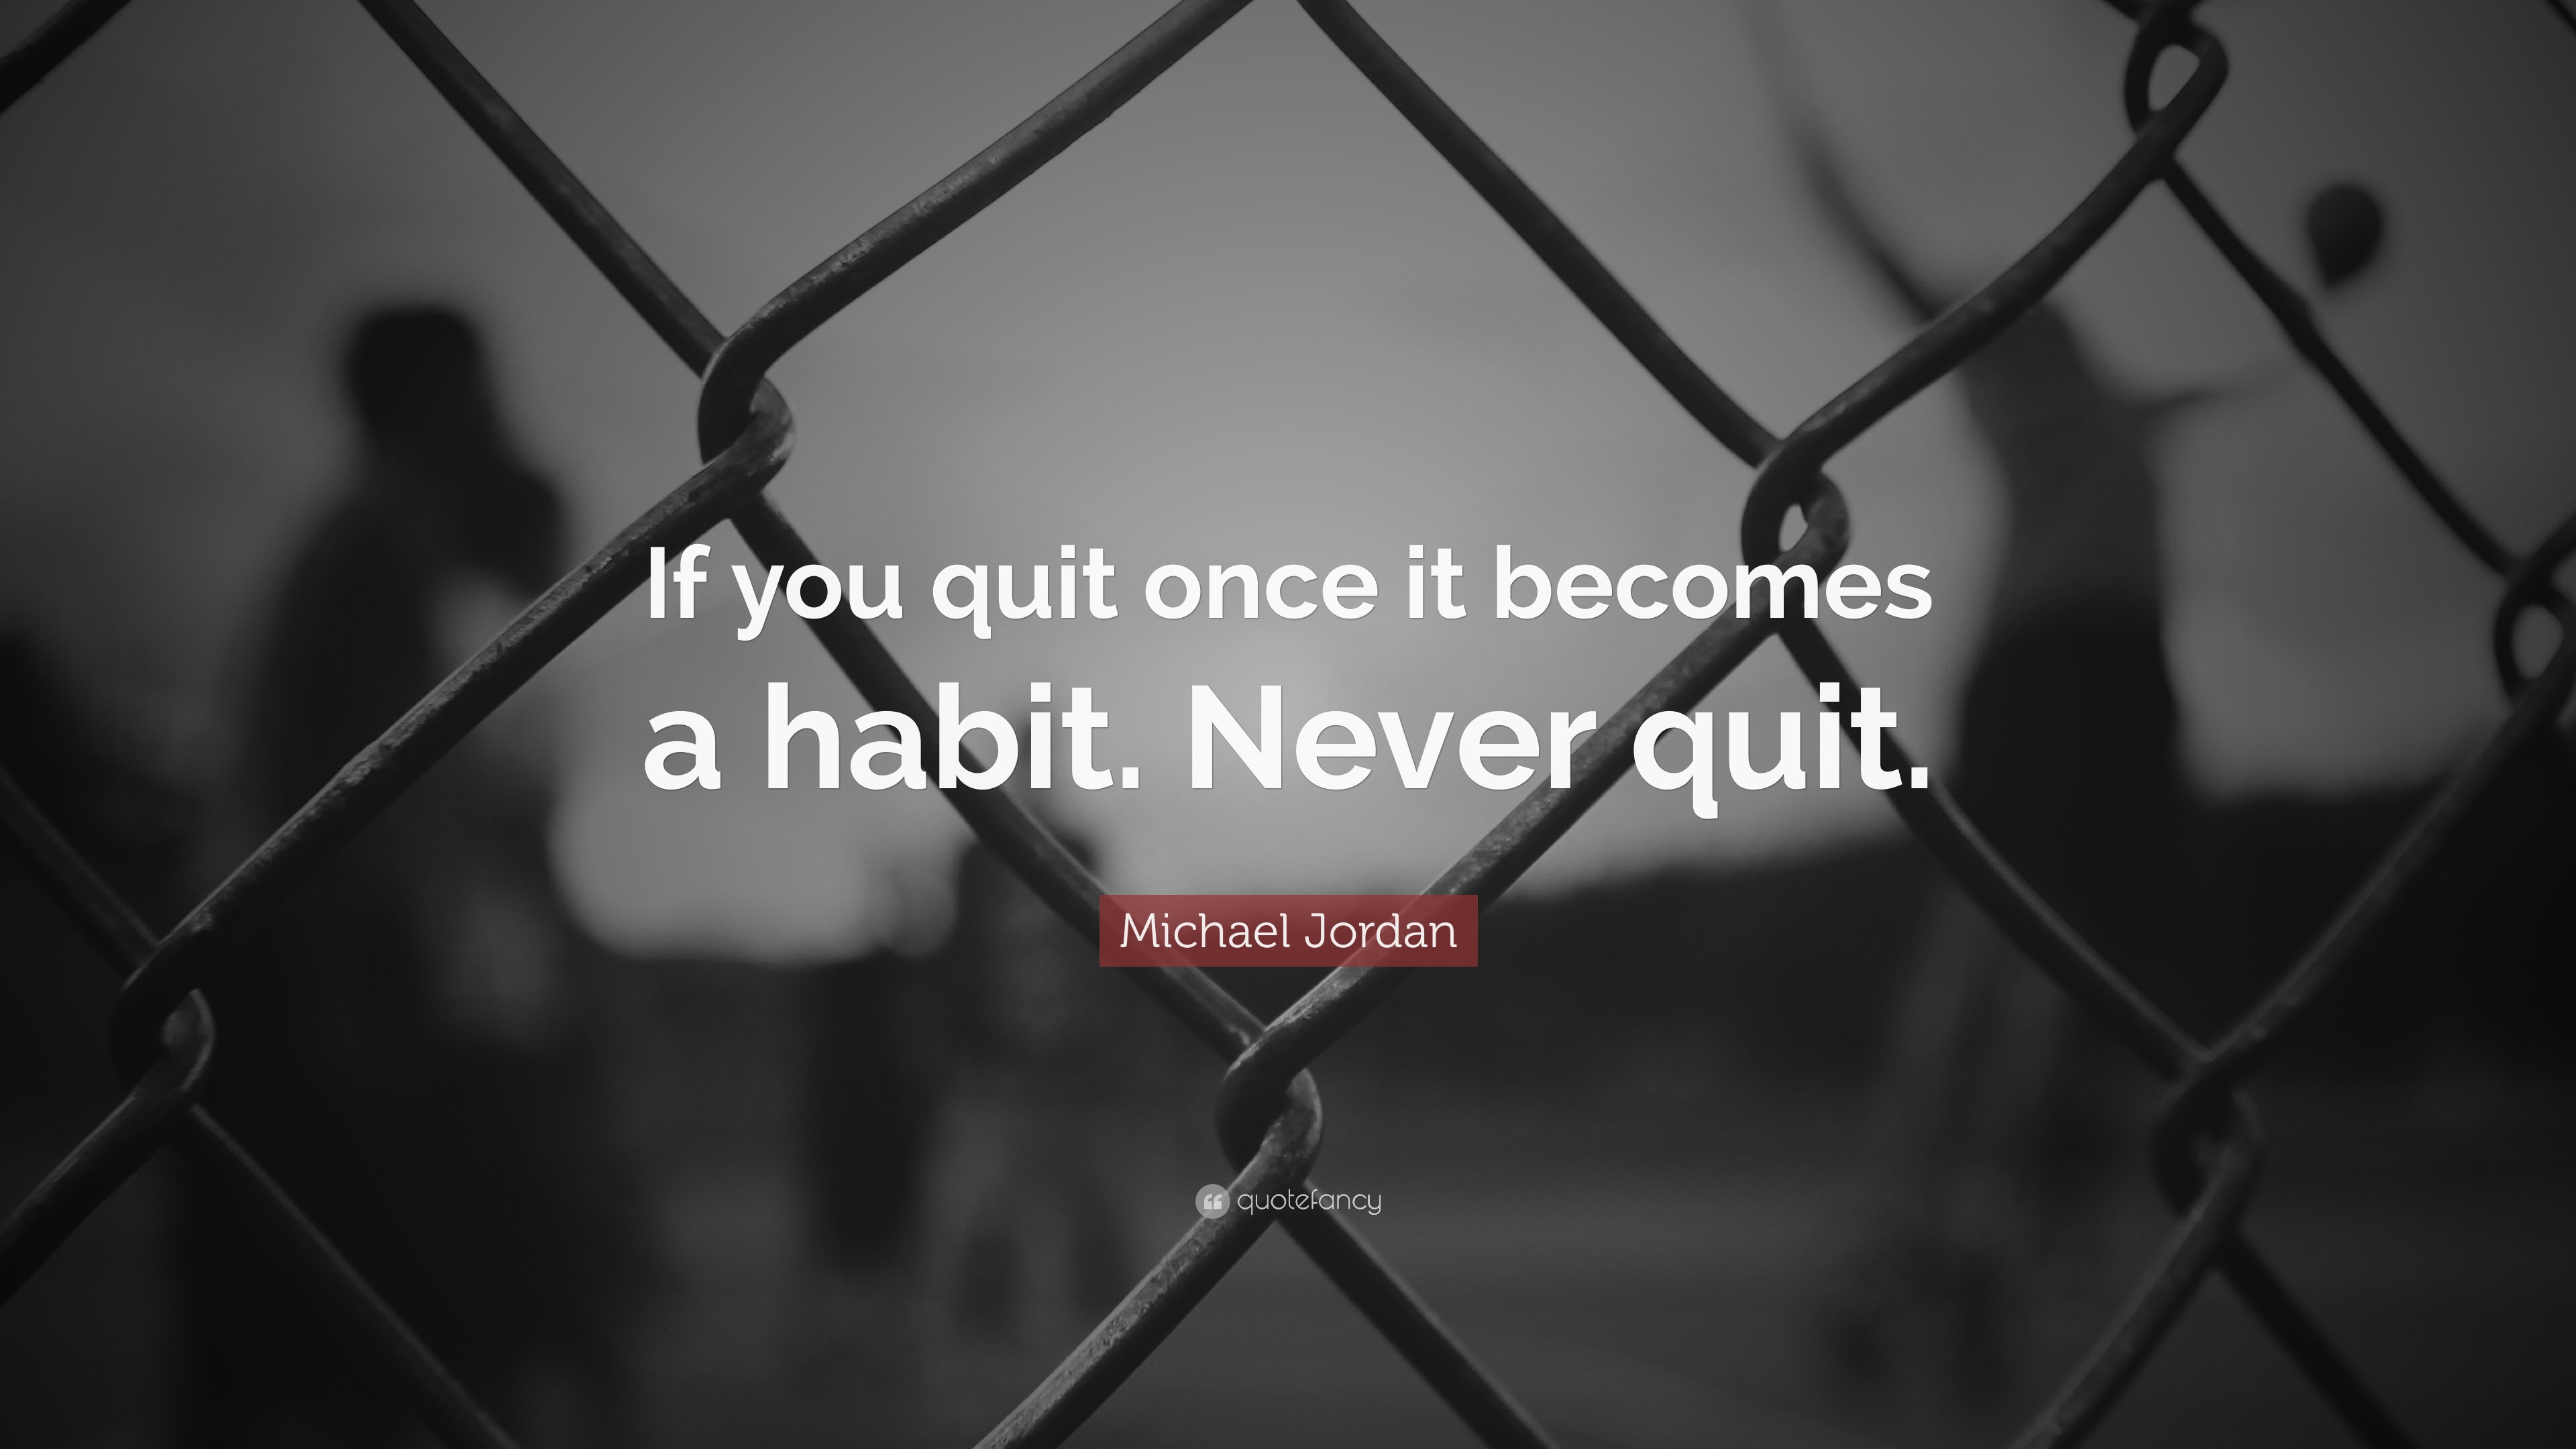 6361056 Michael Jordan Quote If you quit once it becomes a habit Never